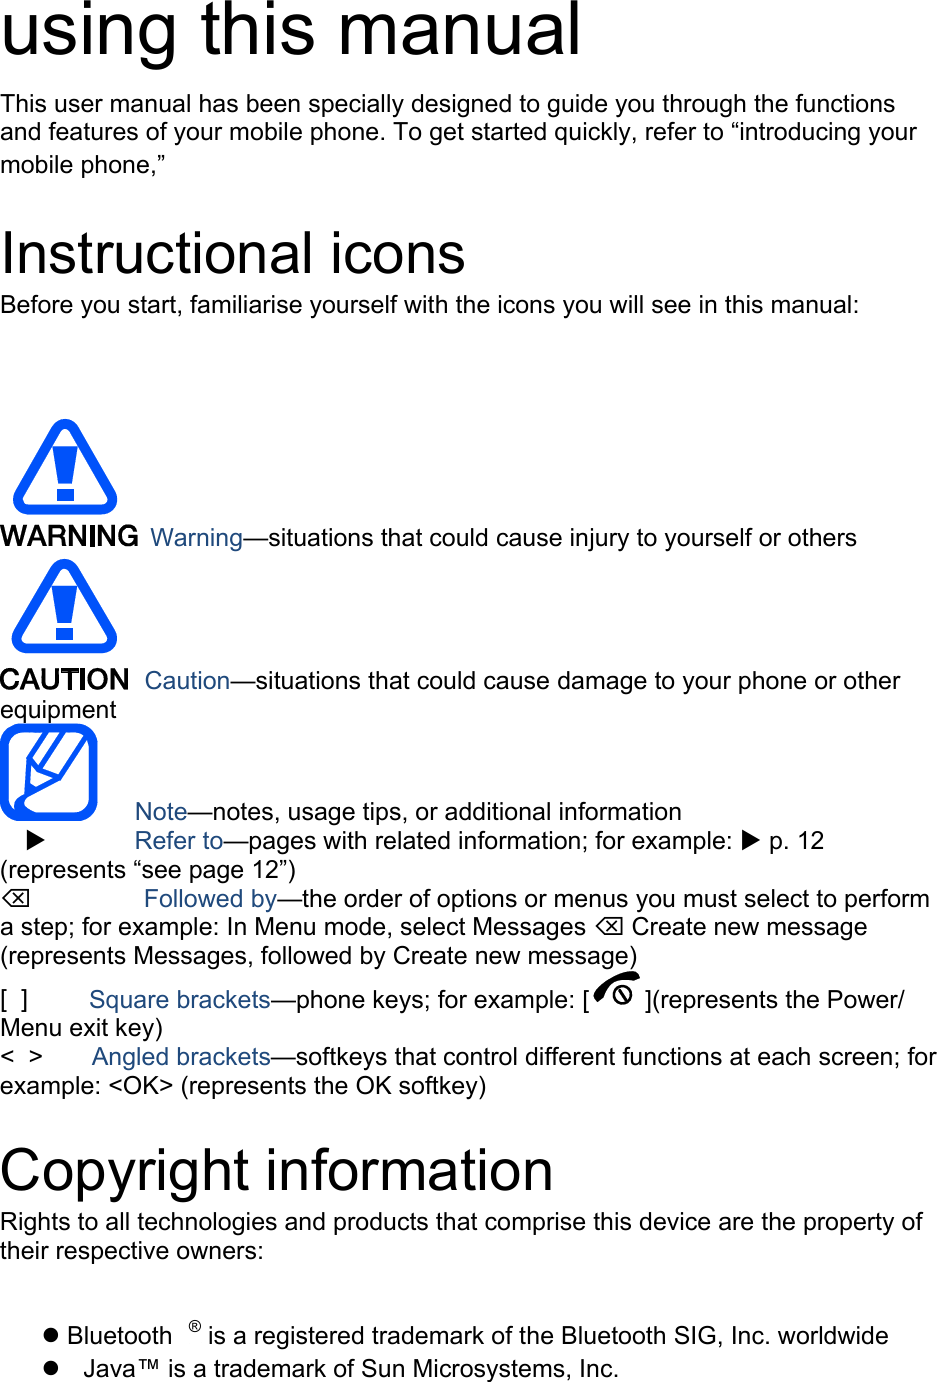 using this manual This user manual has been specially designed to guide you through the functions and features of your mobile phone. To get started quickly, refer to “Xintroducing your mobile phoneX,” Instructional icons Before you start, familiarise yourself with the icons you will see in this manual:     Warning—situations that could cause injury to yourself or others  Caution—situations that could cause damage to your phone or other equipment    Note—notes, usage tips, or additional information   X       Refer to—pages with related information; for example: X p. 12 (represents “see page 12”) ⌫       Followed by—the order of options or menus you must select to perform a step; for example: In Menu mode, select Messages ⌫ Create new message (represents Messages, followed by Create new message) [  ]     Square brackets—phone keys; for example: [ ](represents the Power/ Menu exit key) &lt;  &gt;    Angled brackets—softkeys that control different functions at each screen; for example: &lt;OK&gt; (represents the OK softkey)  Copyright information Rights to all technologies and products that comprise this device are the property of their respective owners:   Bluetooth P®P is a registered trademark of the Bluetooth SIG, Inc. worldwide   Java™ is a trademark of Sun Microsystems, Inc. 